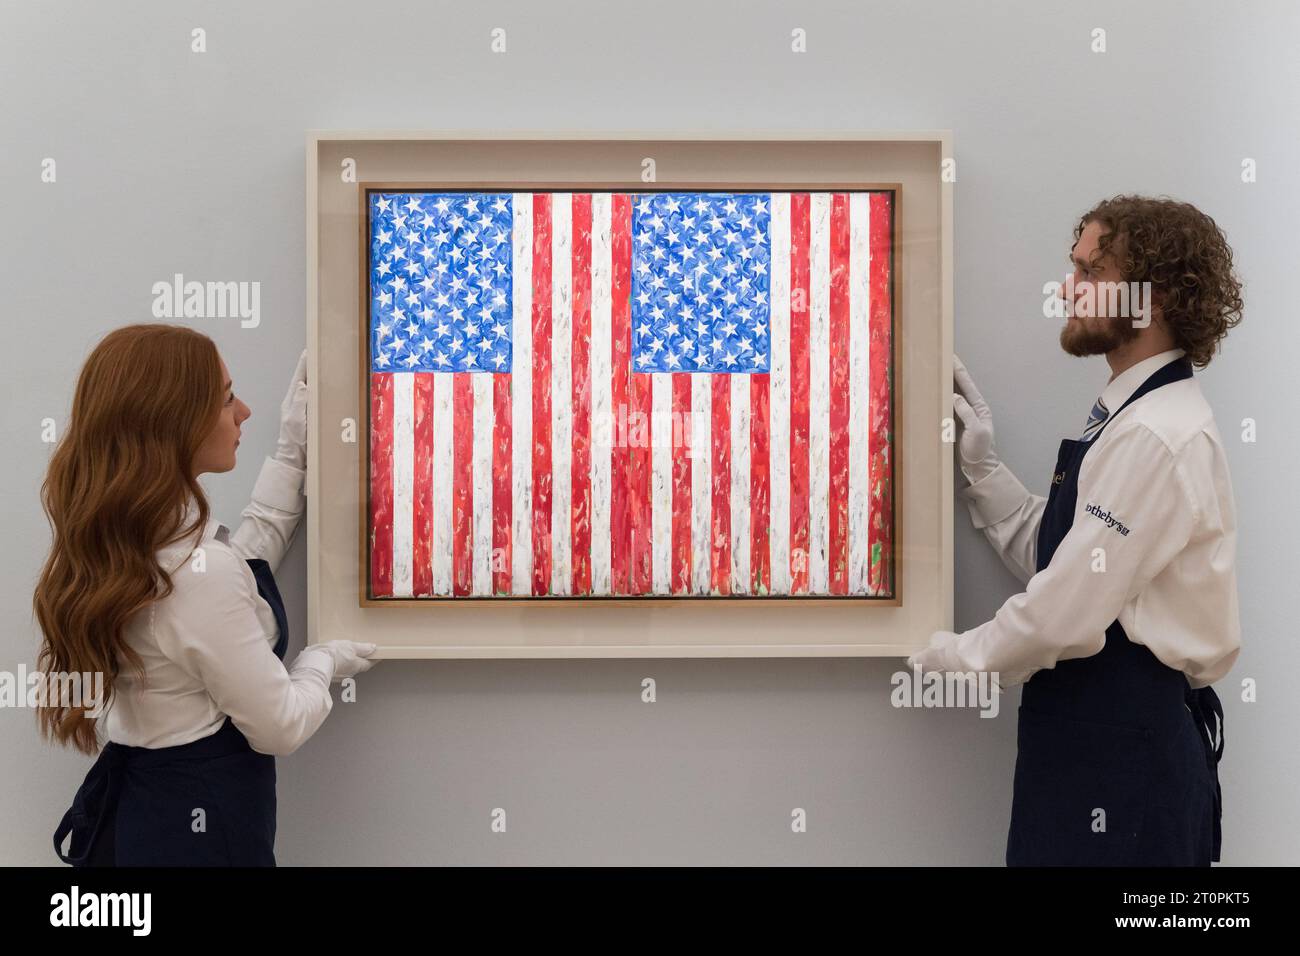 LONDON, UNITED KINGDOM - OCTOBER 06, 2023: Gallery staff members hold a painting by Jasper Johns, Flags, 1986, estimate $35 - 45 Million, during a photocall at Sotheby's auction house showcasing the highlights of Emily Fisher Landau collection in London, United Kingdom on October 06, 2023. The artworks from the collection of modern, post-war and contemporary art will be on view at Sotheby's in London between 7 and 11 October before being offered during two dedicated auctions in New York in November. (Photo by WIktor Szymanowicz/NurPhoto) Stock Photo